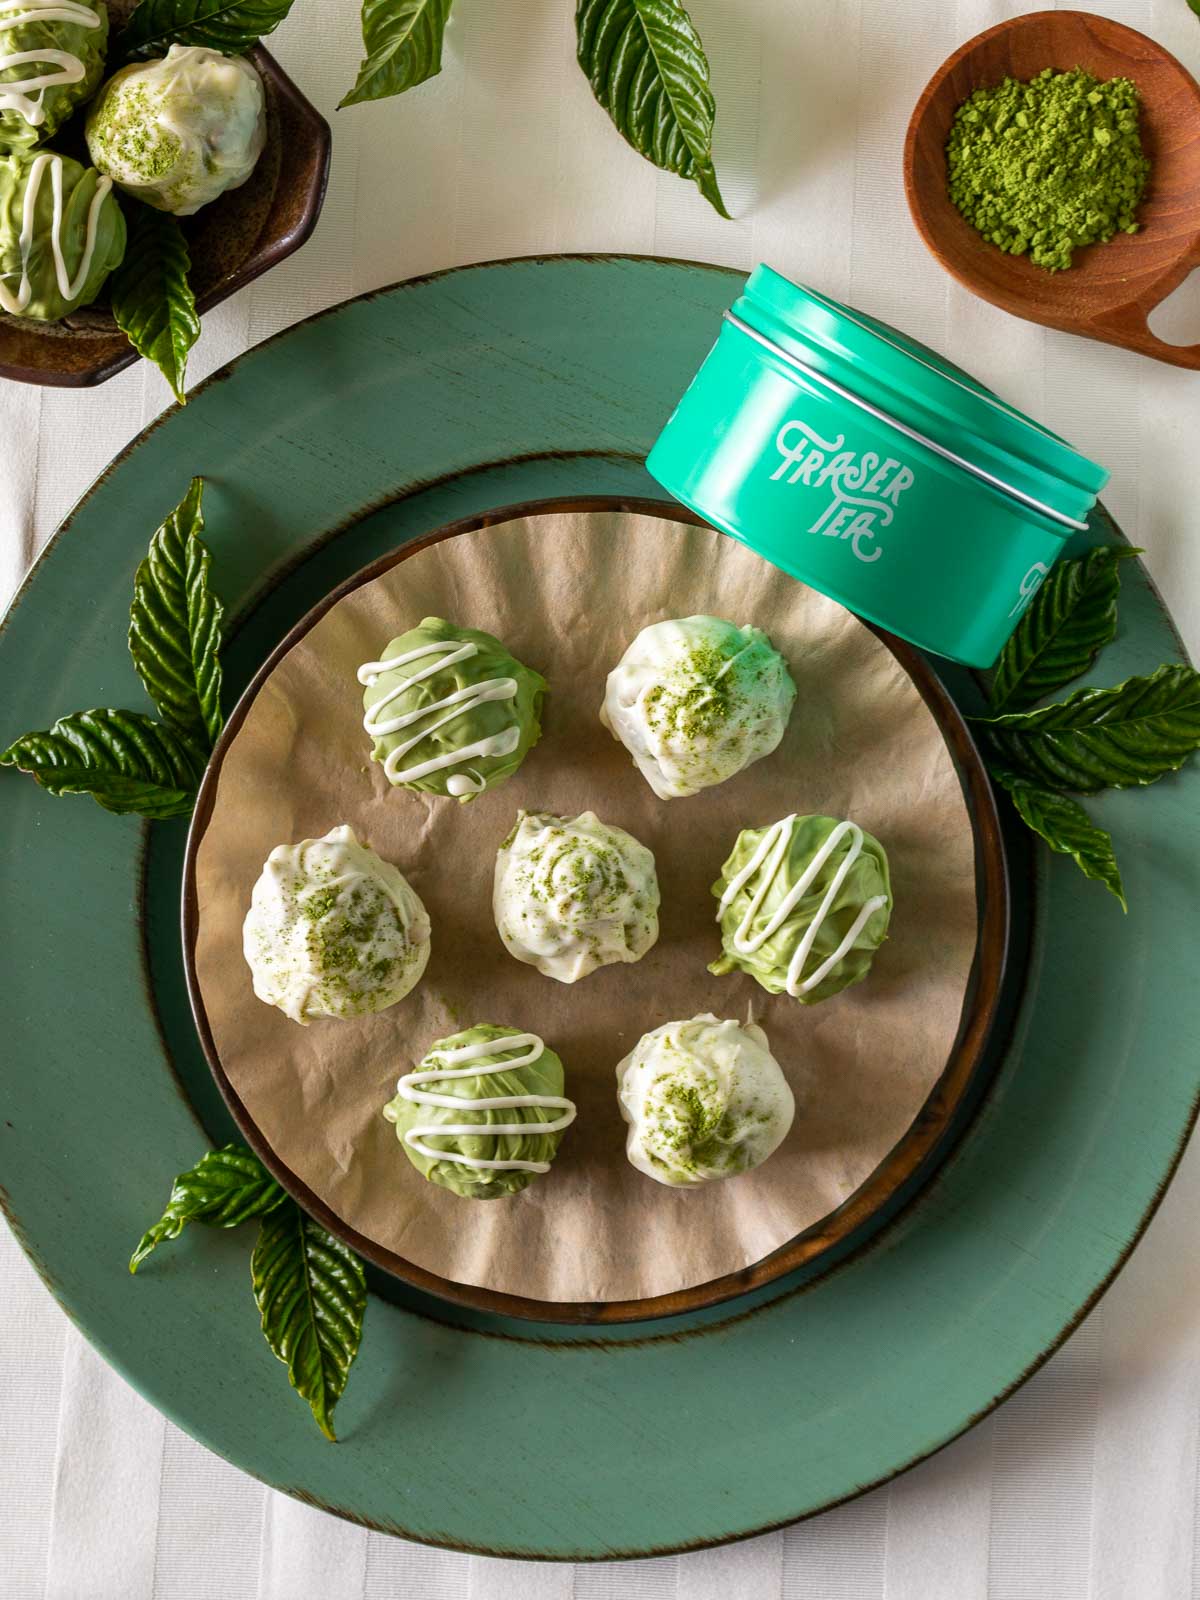 Top down photo of Fraser Tea Matcha truffles on a green plate,